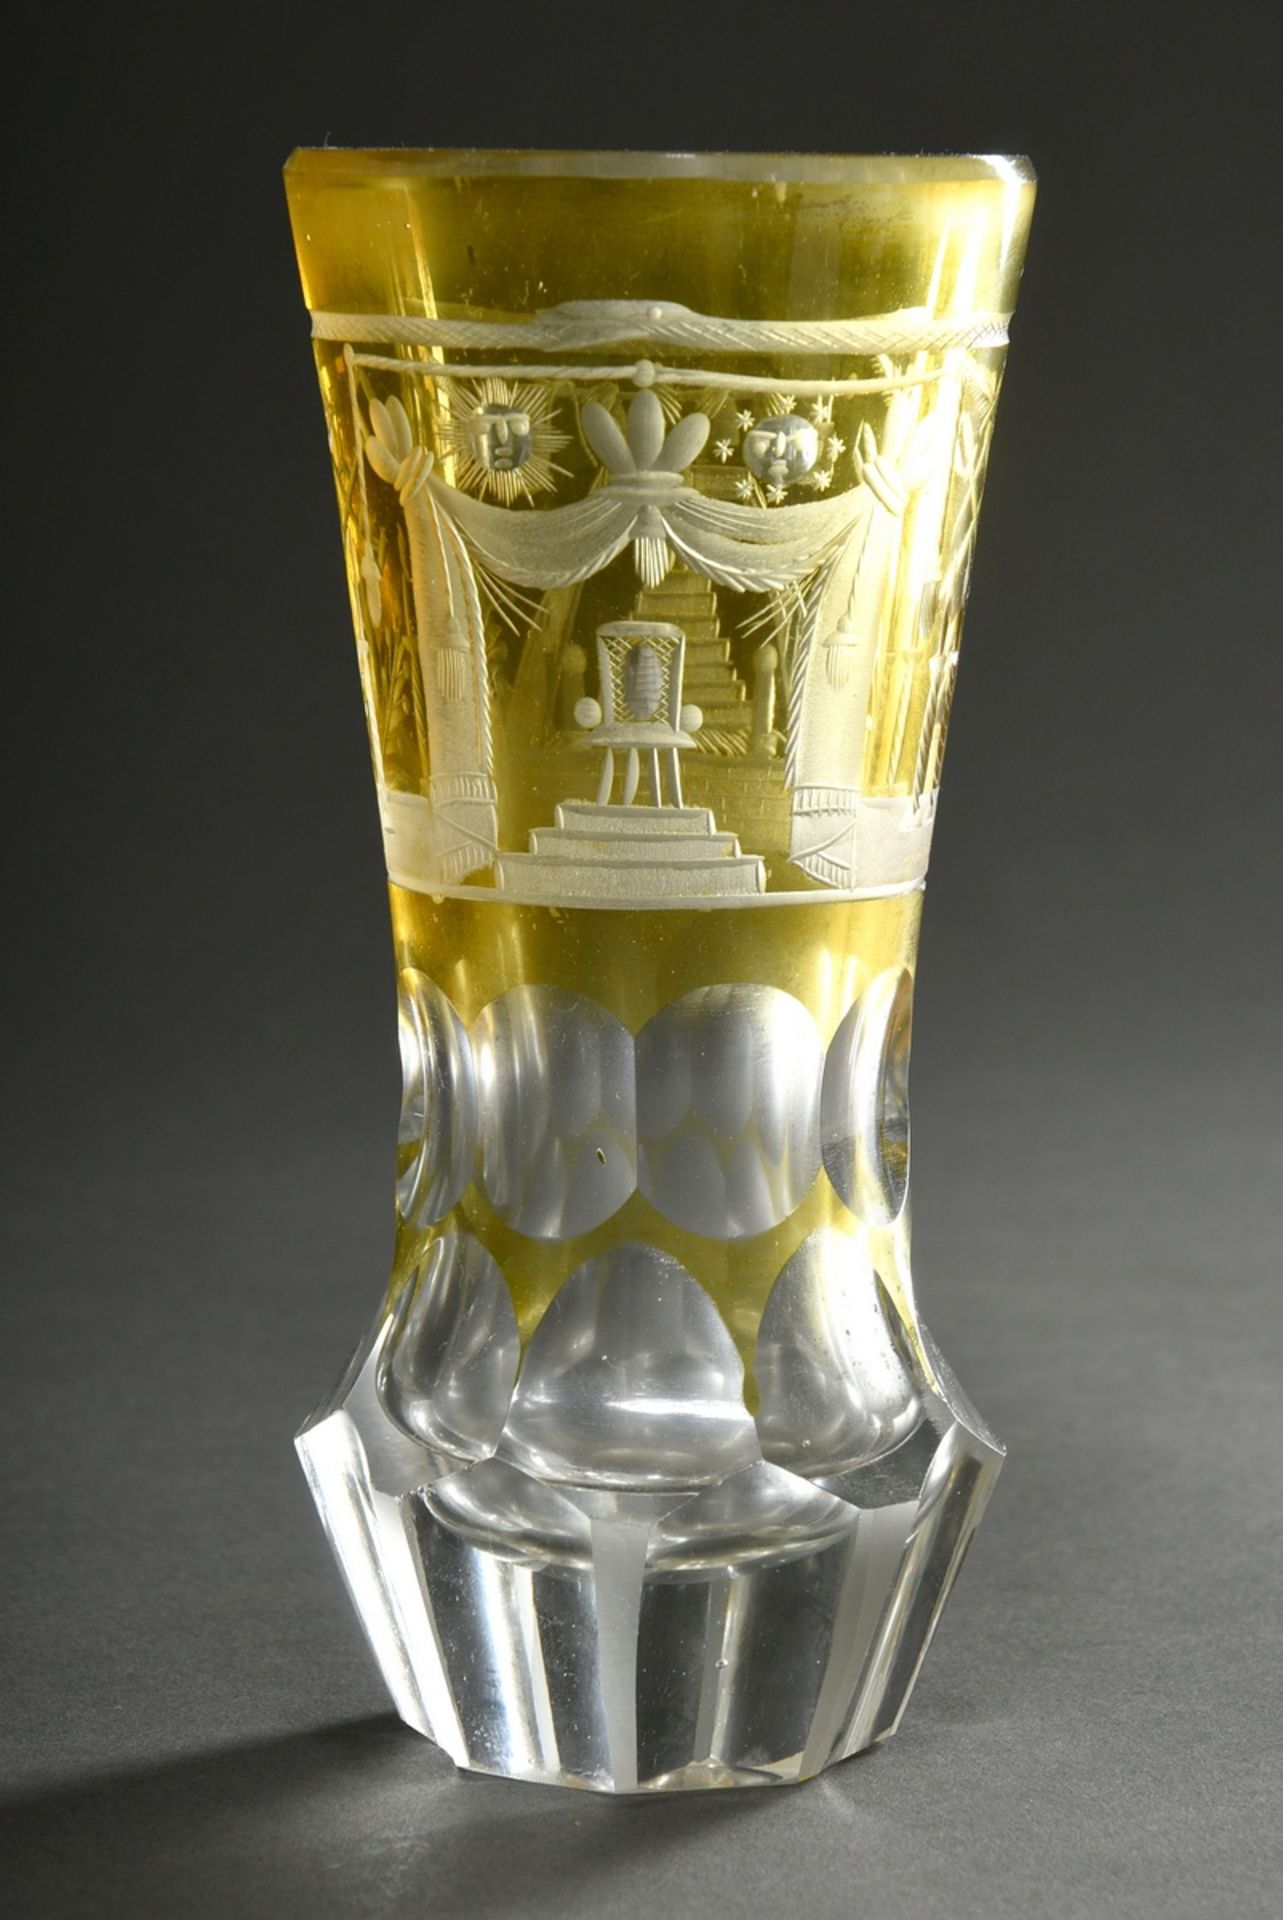 Heavy Masonic glass with yellow etched dome, rich facet cut and conical foot, Bohemia c. 1850/60, h